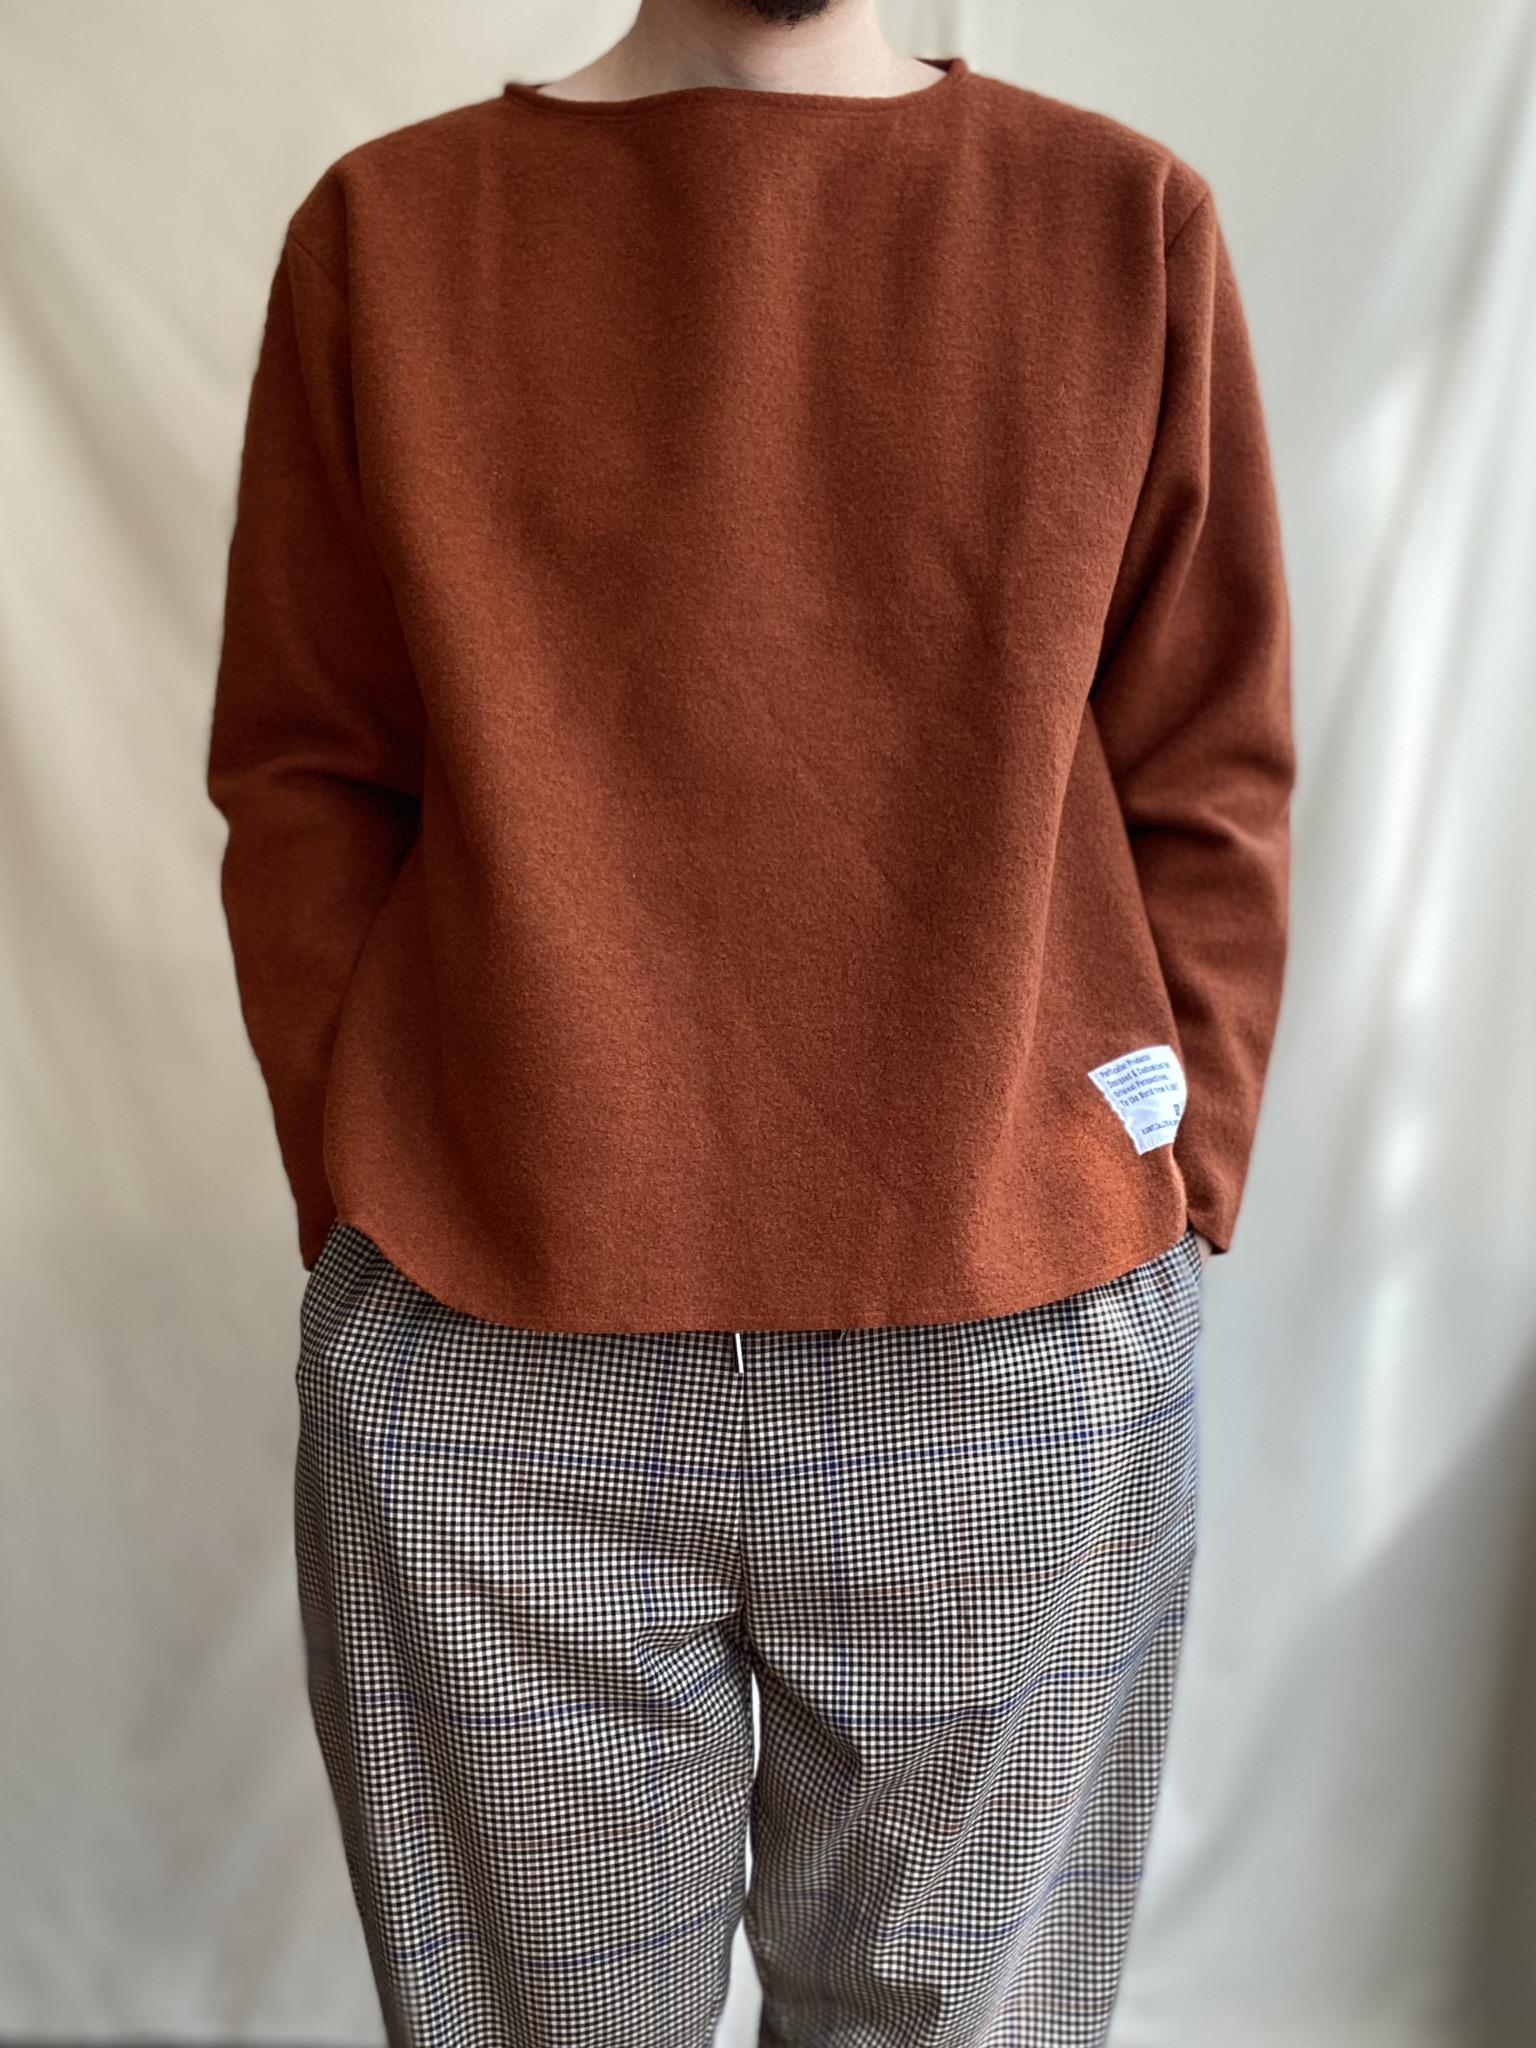 Read more about the article 【BLOG】Boild wool cut off basque shirt Kakiiro!